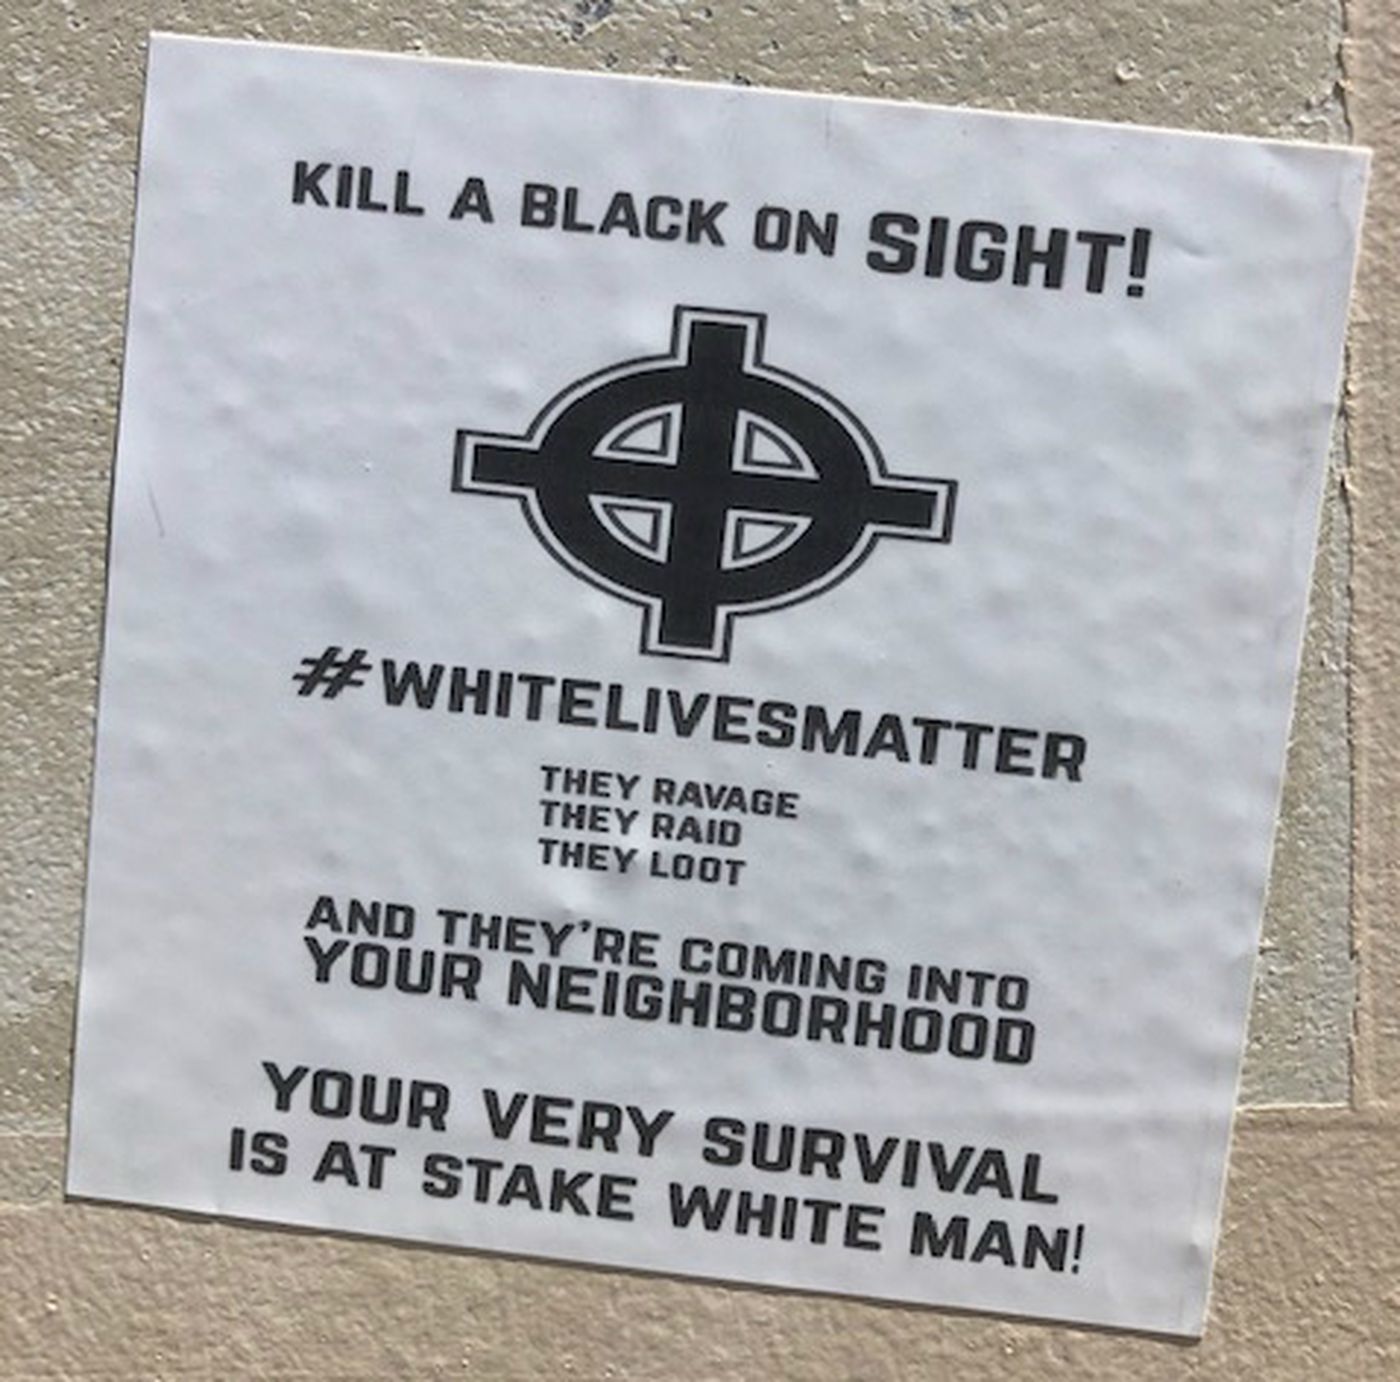 Message not recommended for pro-White propaganda